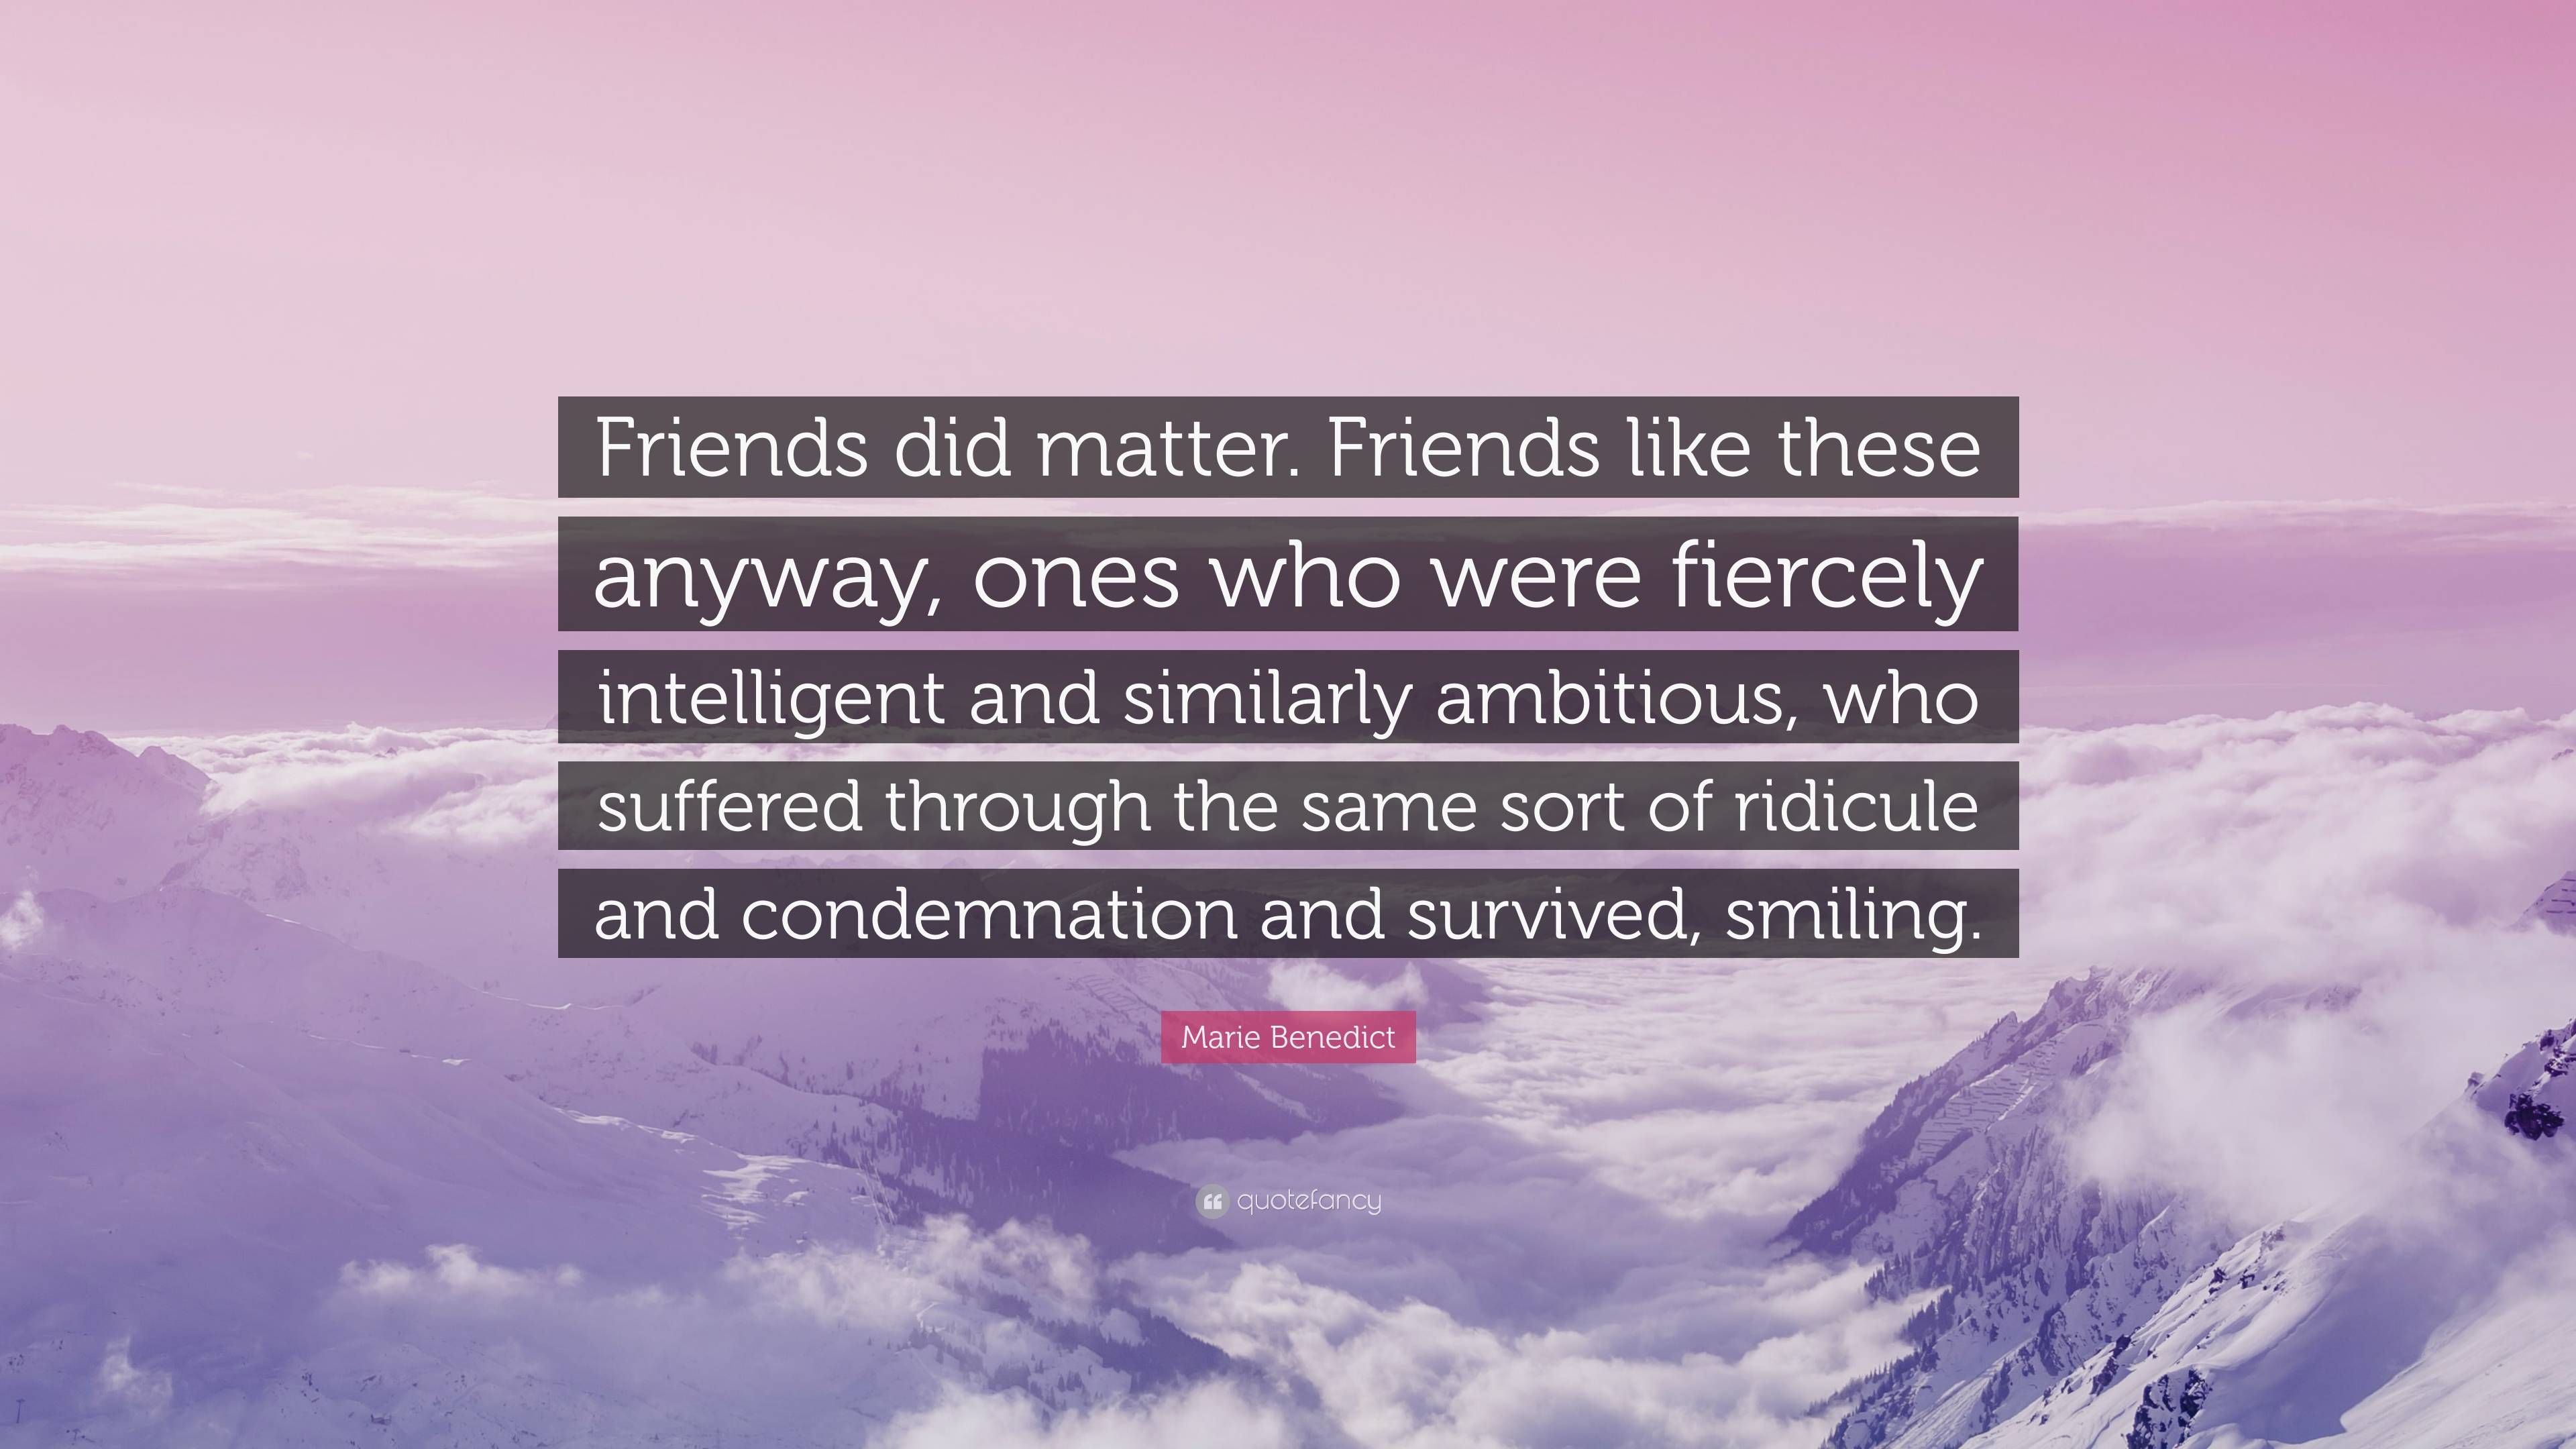 Marie Benedict Quote: “Friends did matter. Friends like these anyway ...